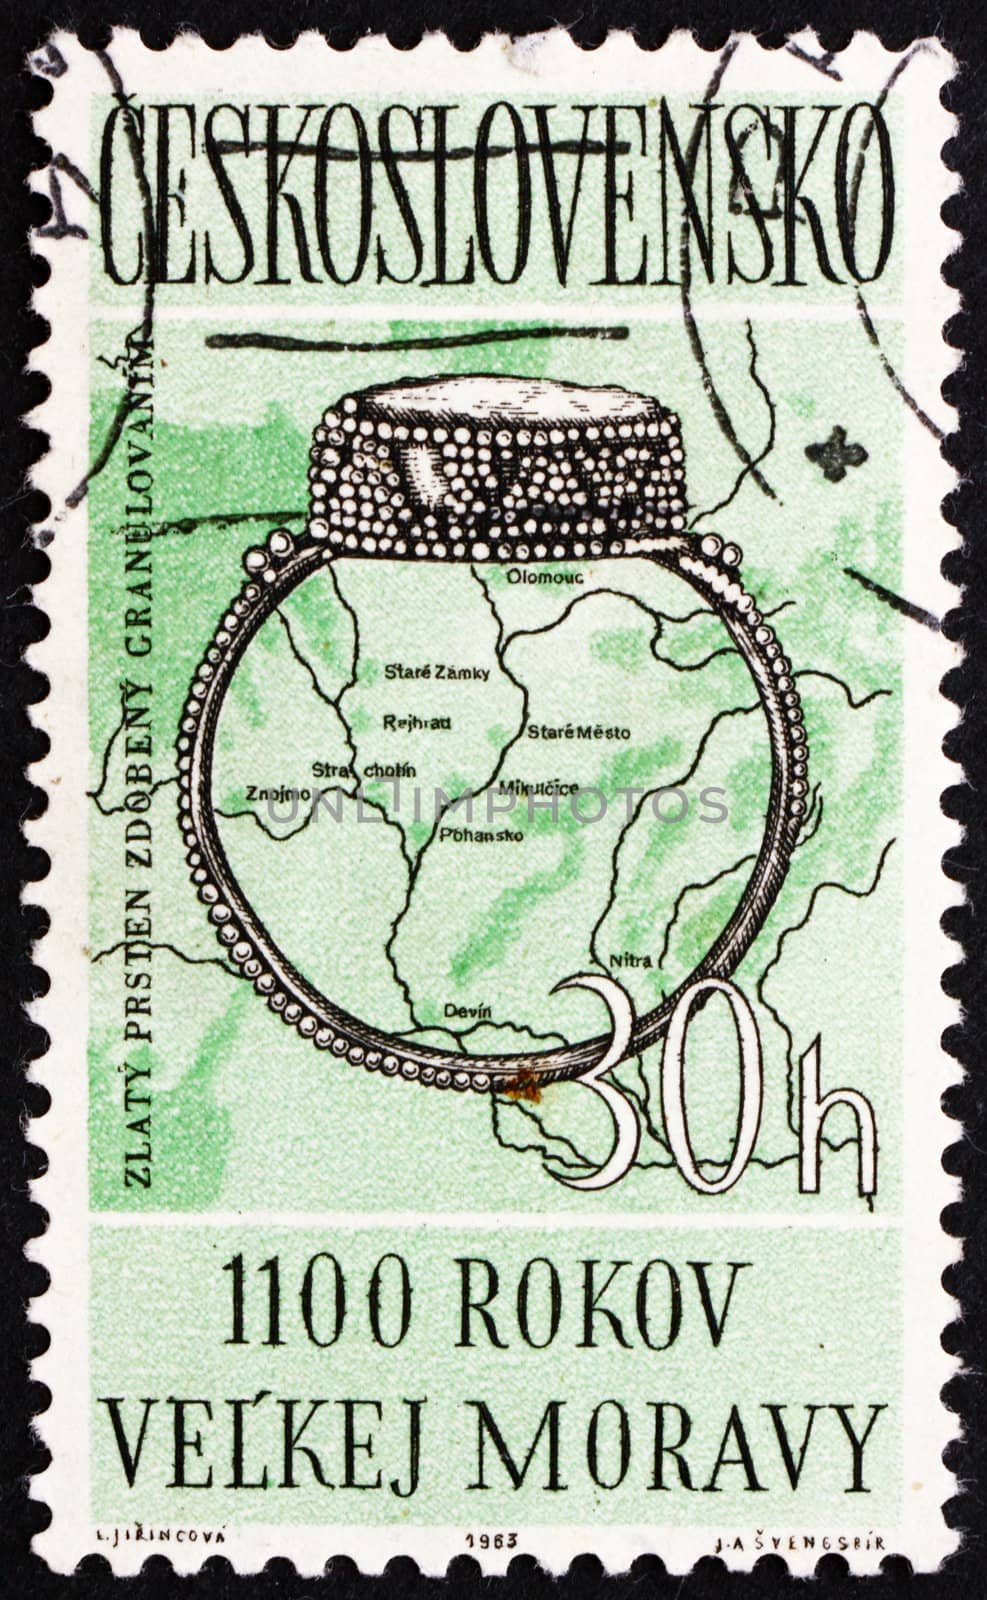 CZECHOSLOVAKIA - CIRCA 1963: a stamp printed in the Czechoslovakia shows 9th Century Ring, Map of Moravian Settlements, 1100th Anniversary of Moravian Empire, circa 1963